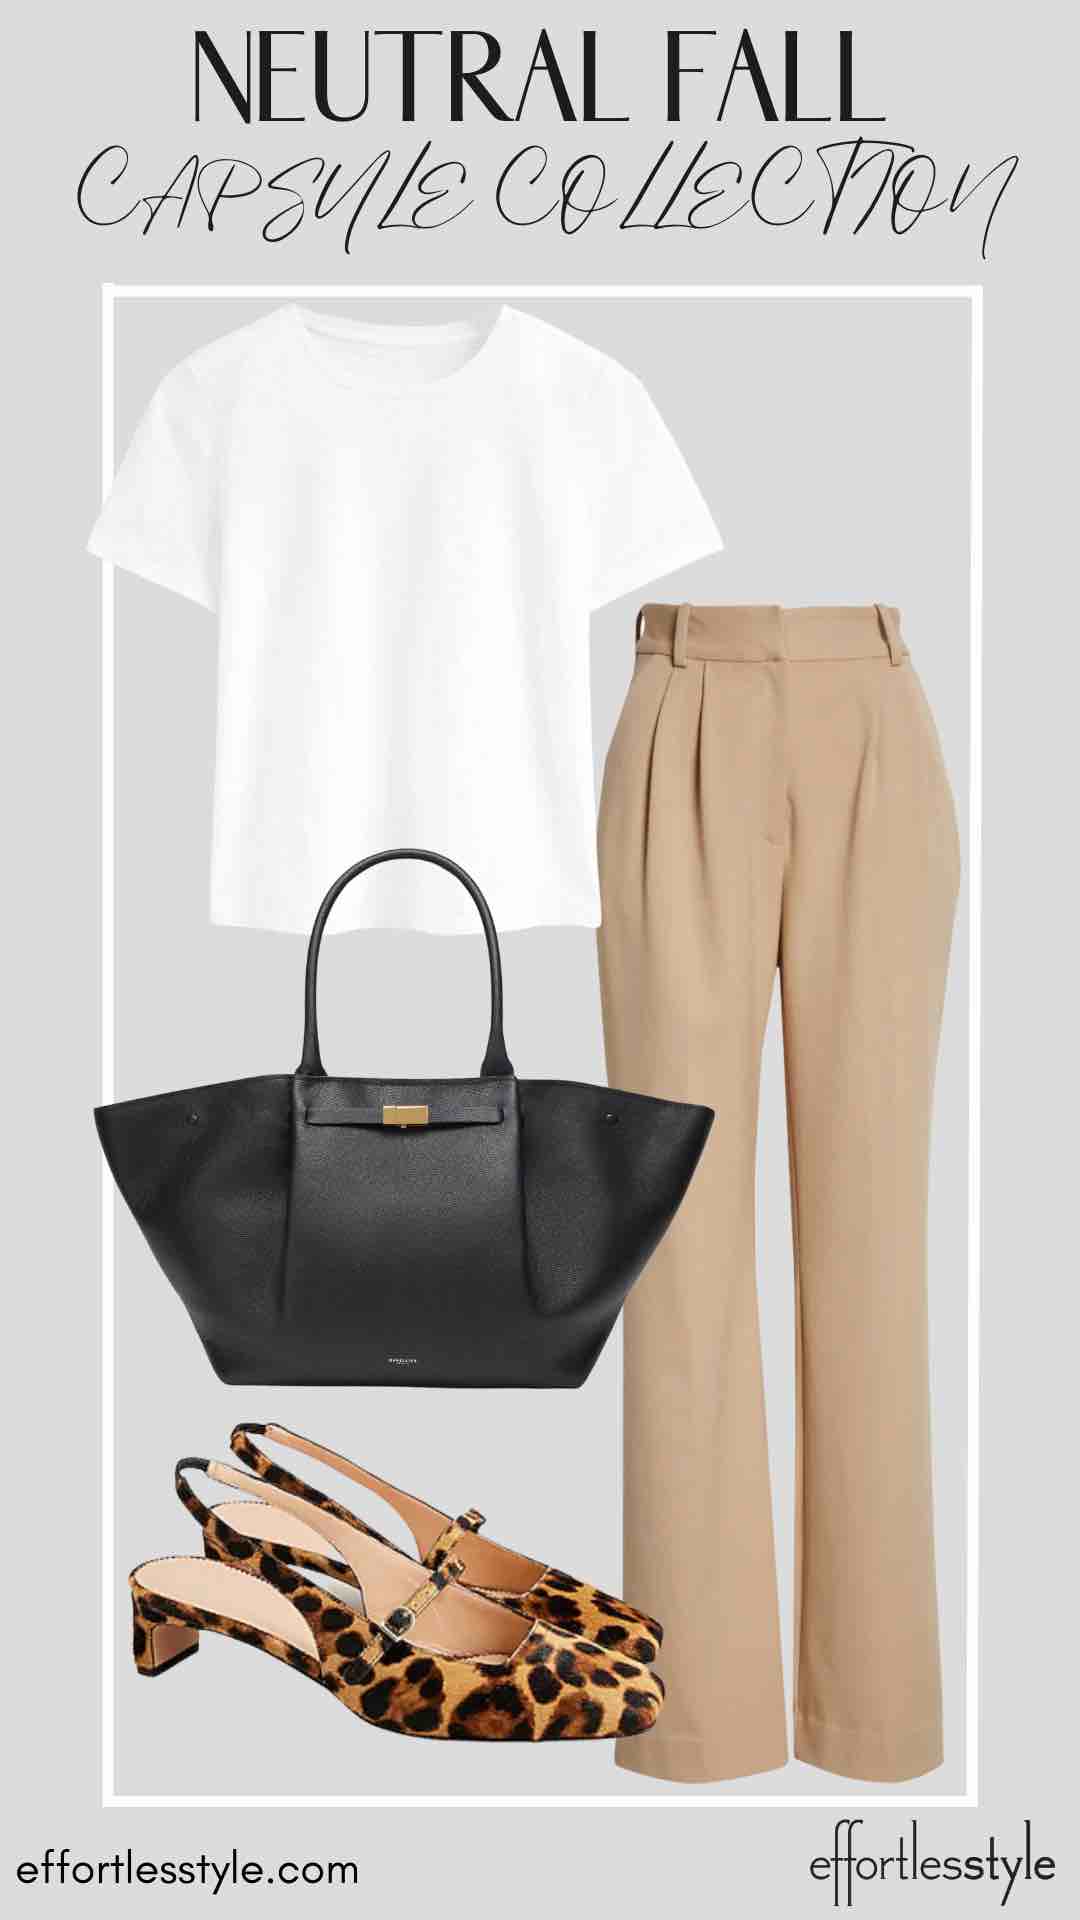 How To Wear Our Neutral Fall Capsule Wardrobe - Part 2 Short Sleeve Tee & Trousers how to wear a tee shirt to work how to style a tee shirt with trousers how to wear animal print to the office the best fall accessories the best neutral pieces for fall how to create a versatile wardrobe how to create a simple wardrobe simple fall style